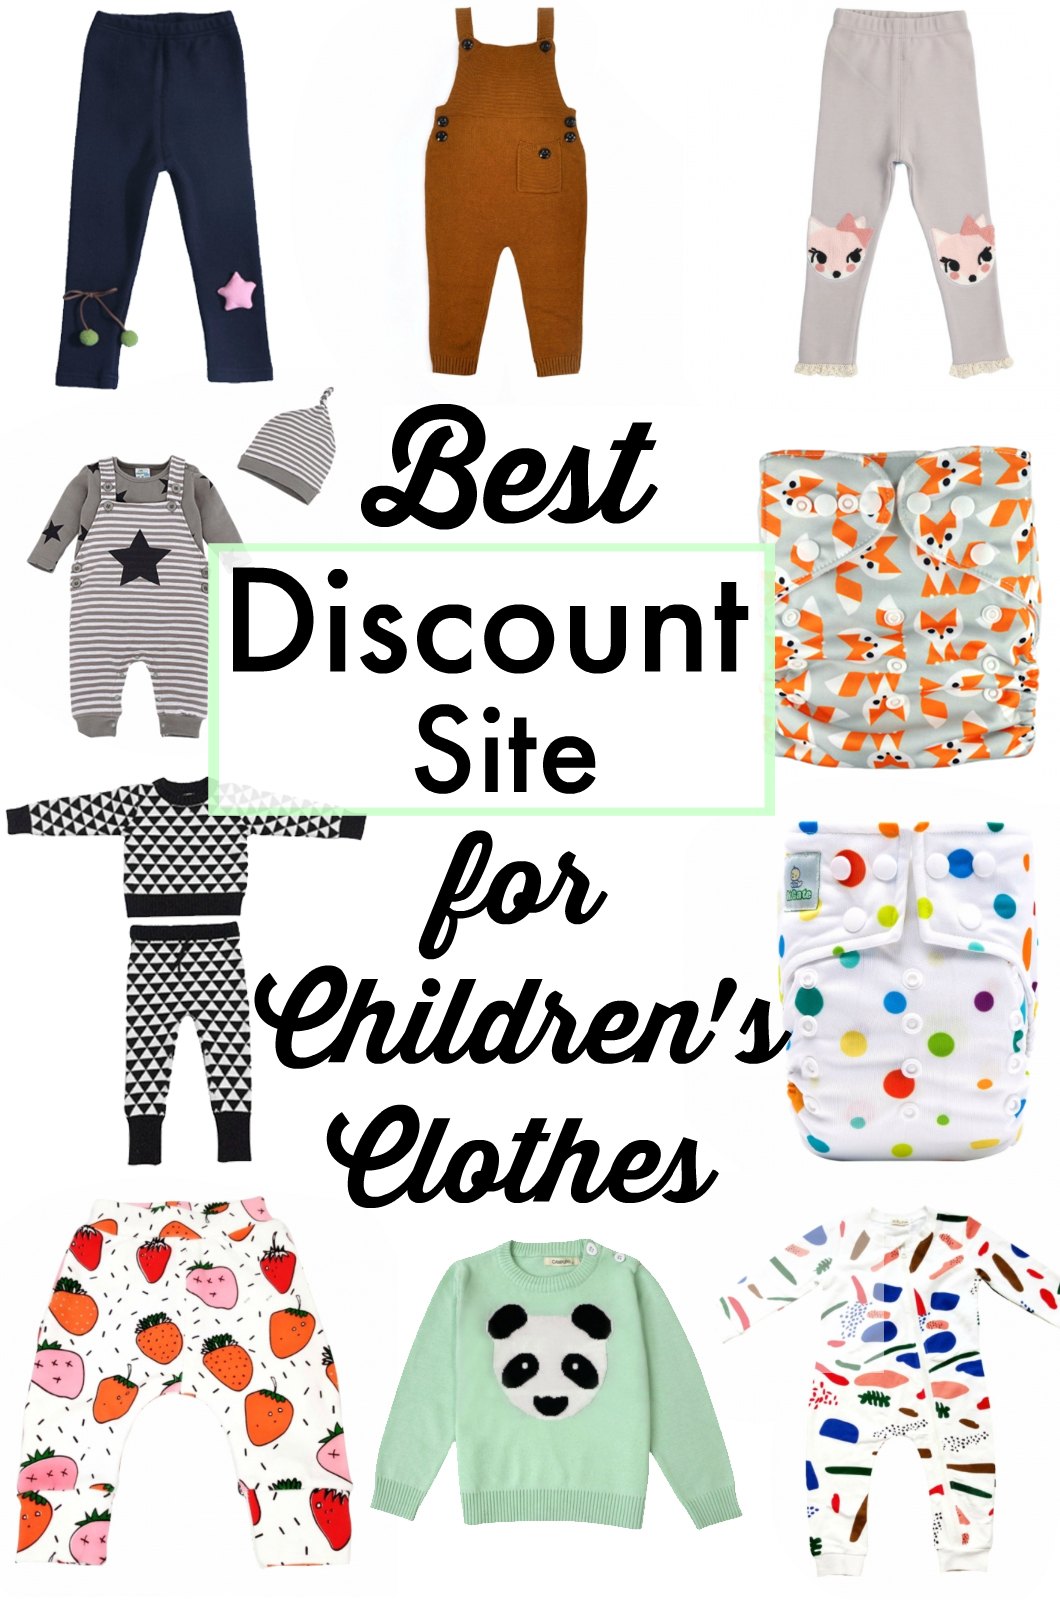 Best Discount Site for Children’s Clothes